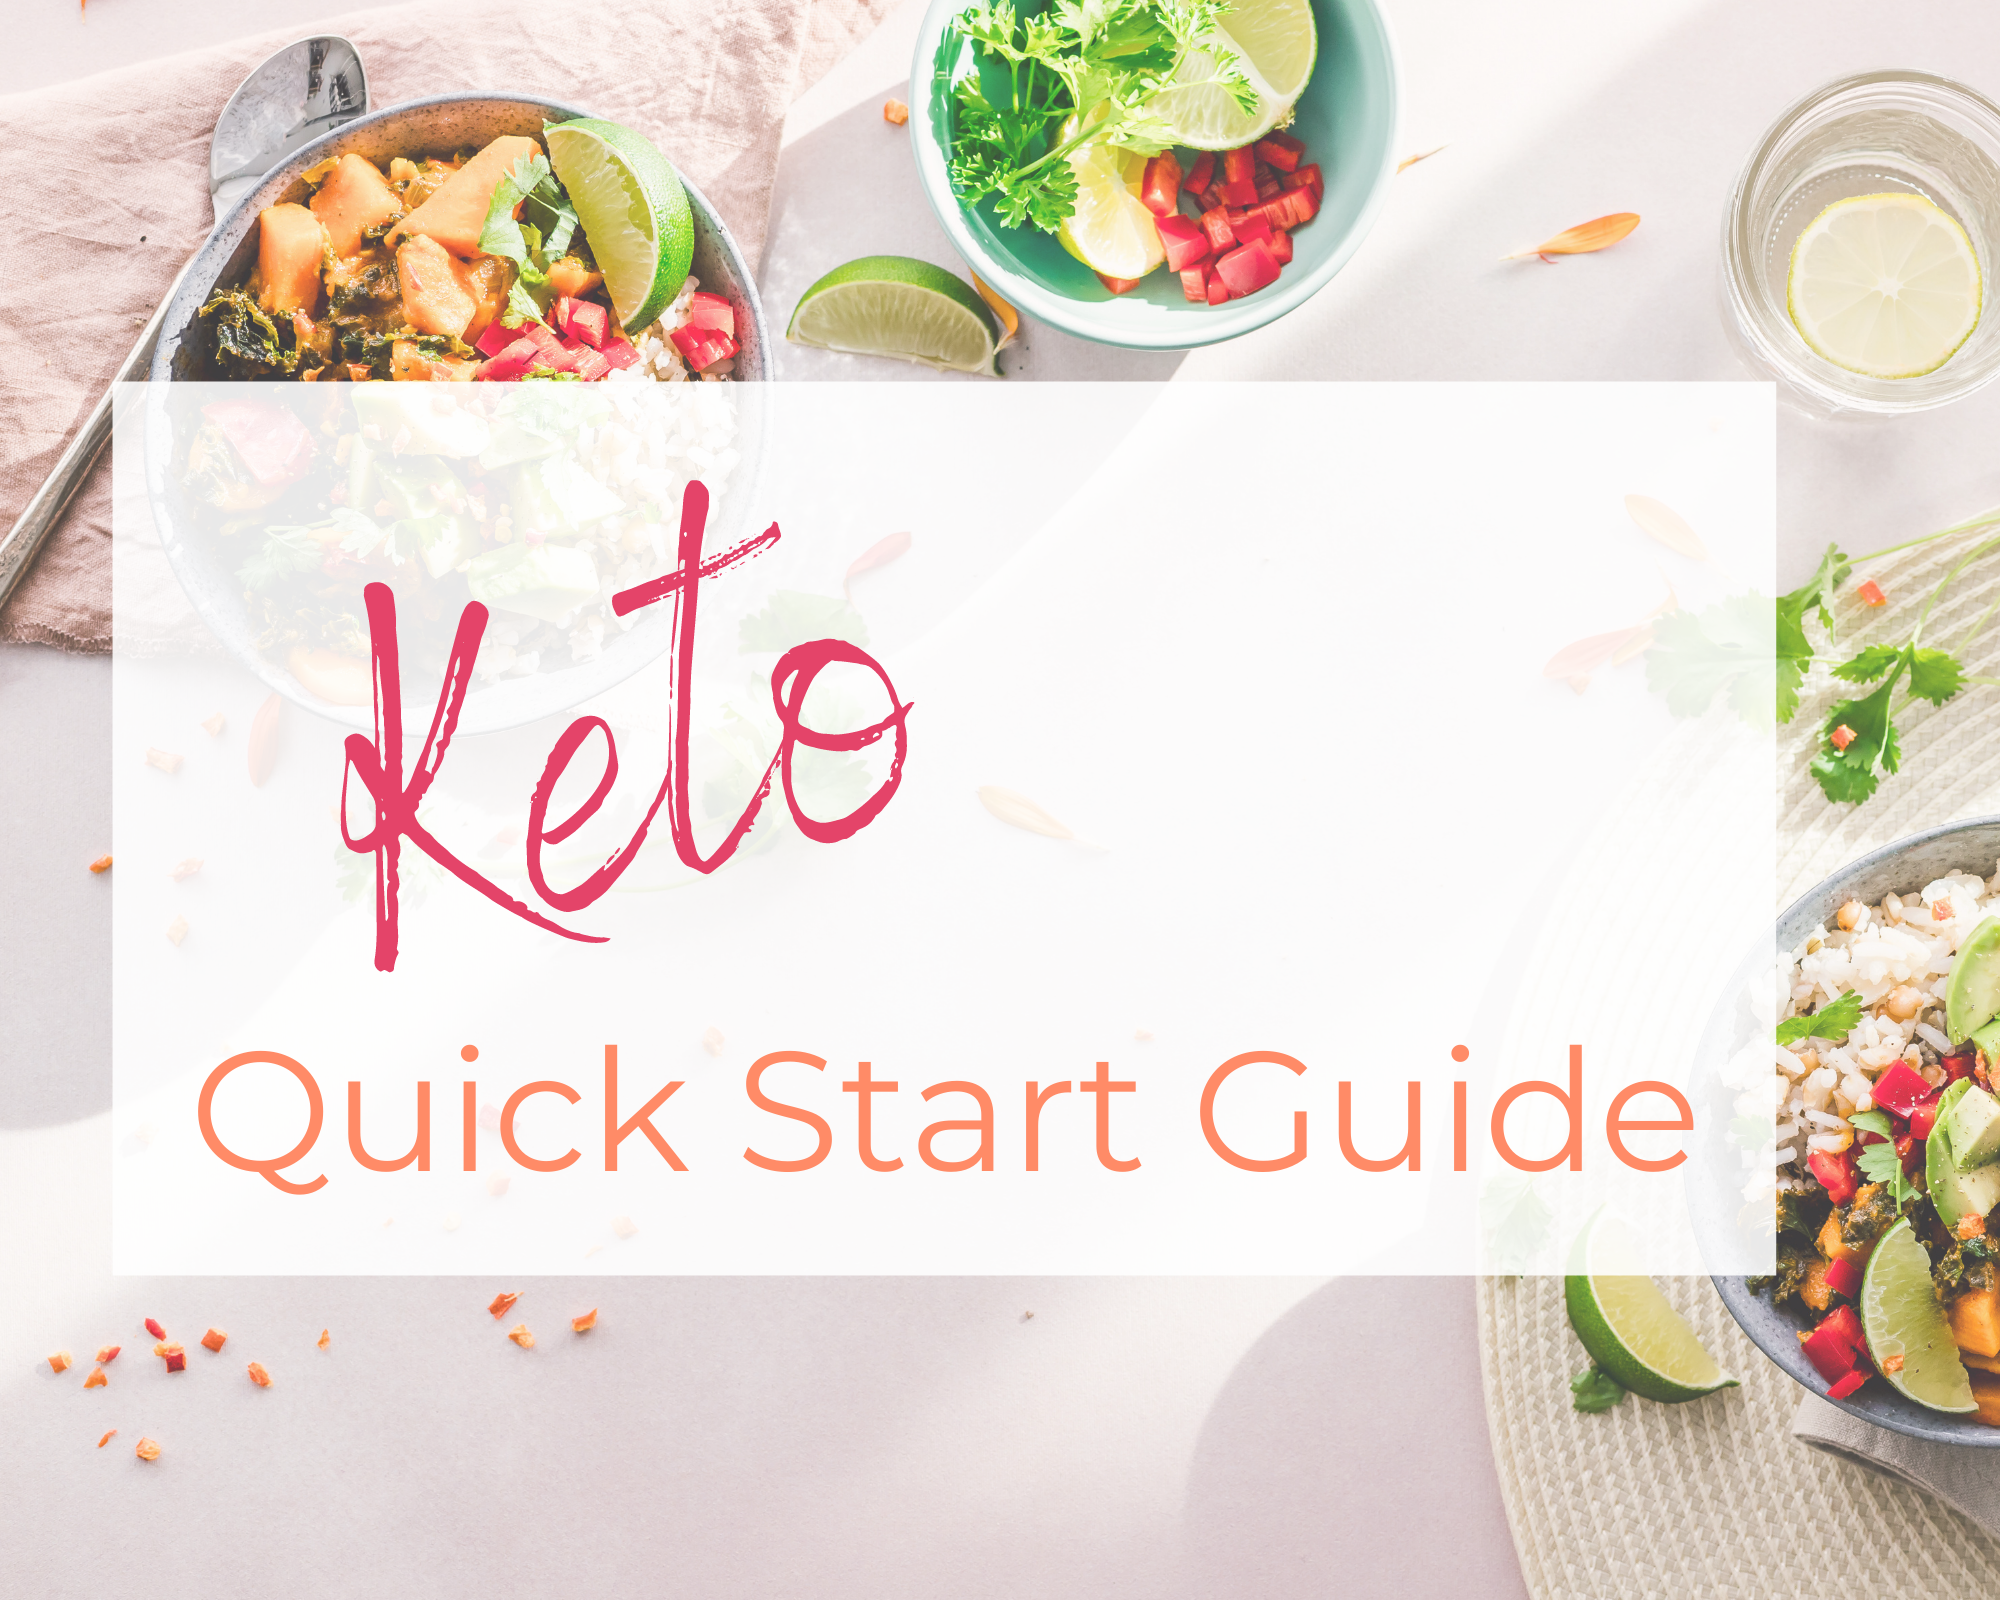 Keto Quick Start Guide - Learn How To Get Started With The Keto Diet Now